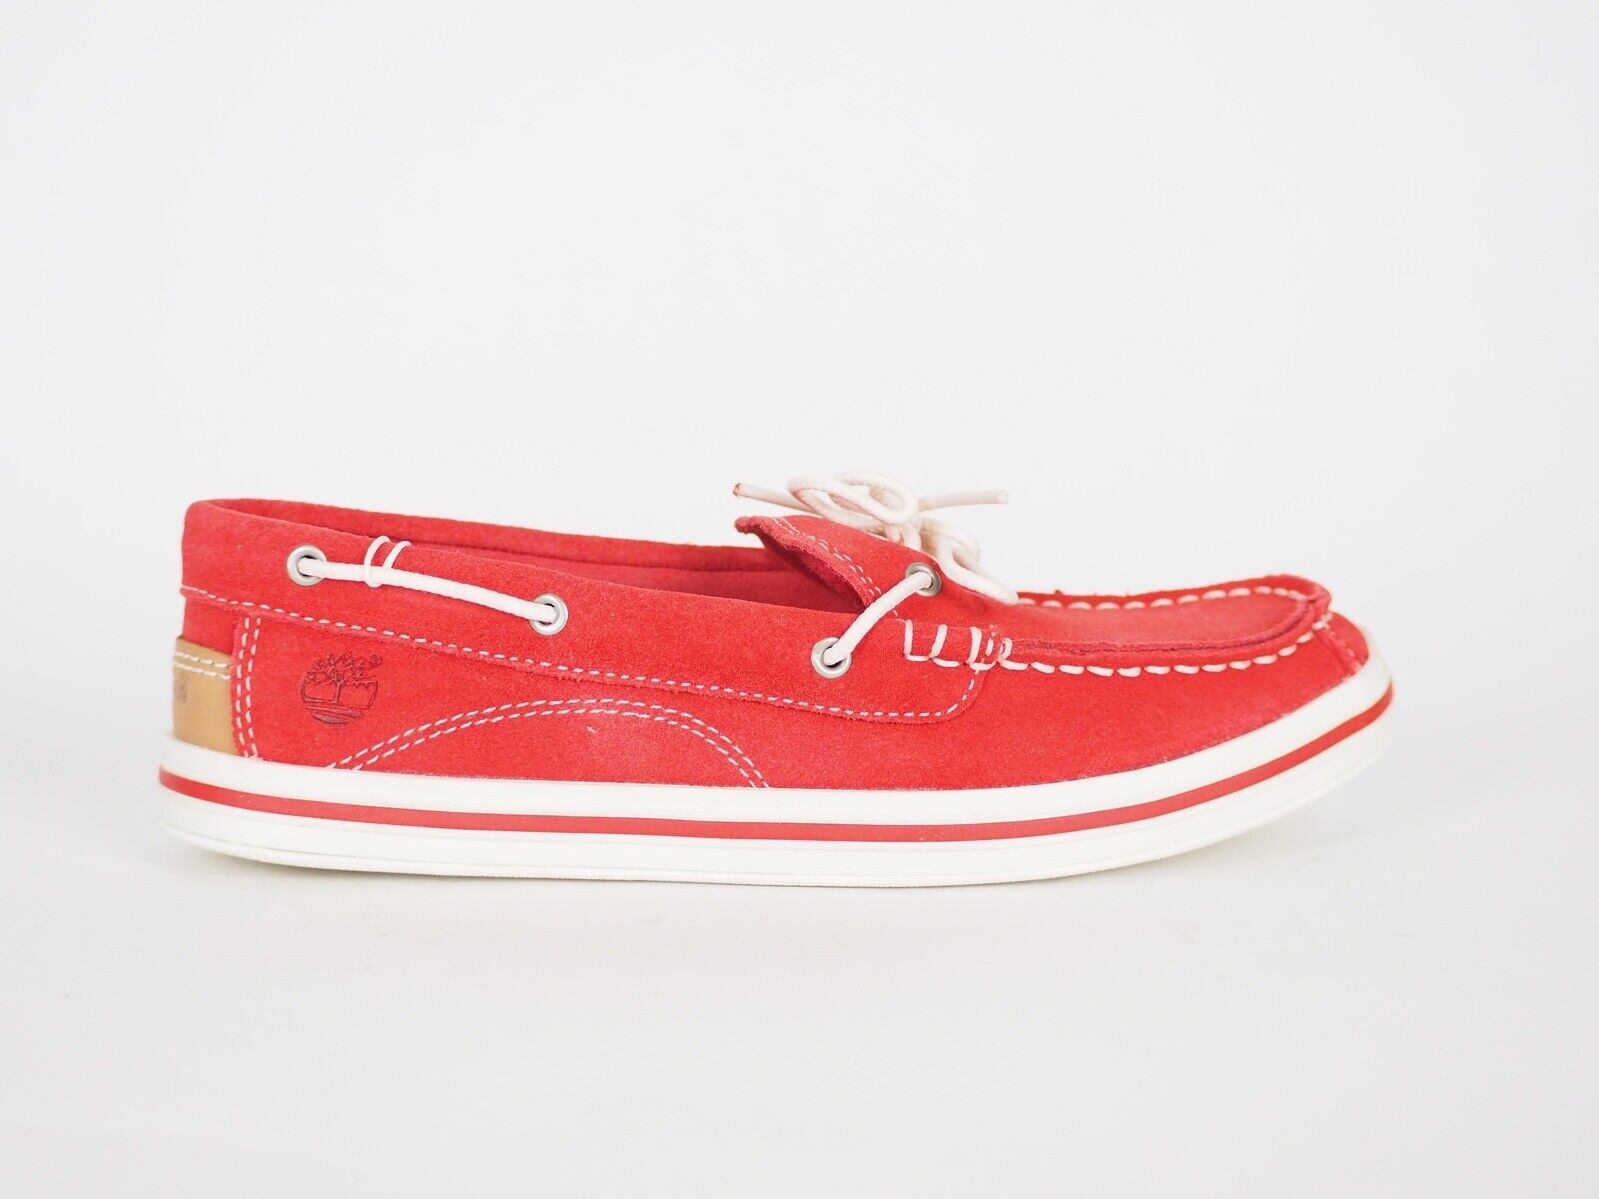 Junior Boys Timberland 7292R Red Suede 1 Eye Deck Boat Shoes - London Top Style